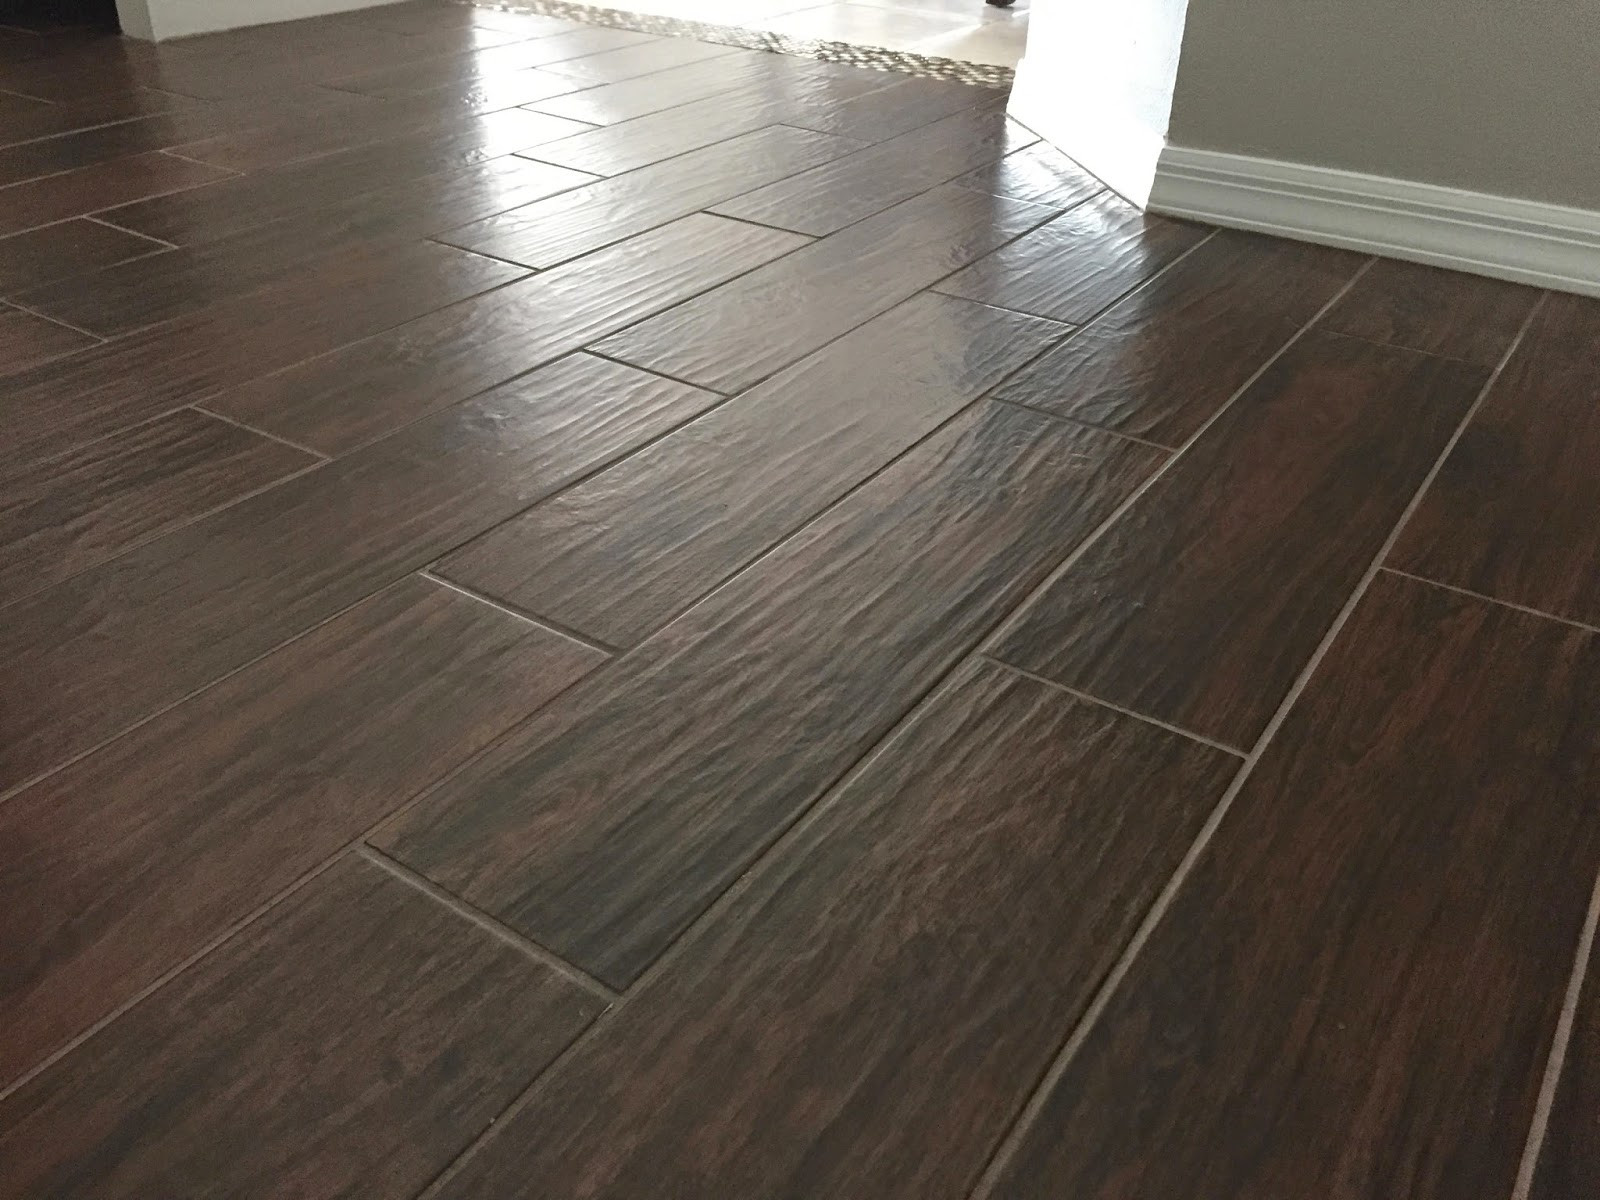 Wood Look Tile Bathroom Floor
 Experience the Magic of “Wood Look Tile” for Quality